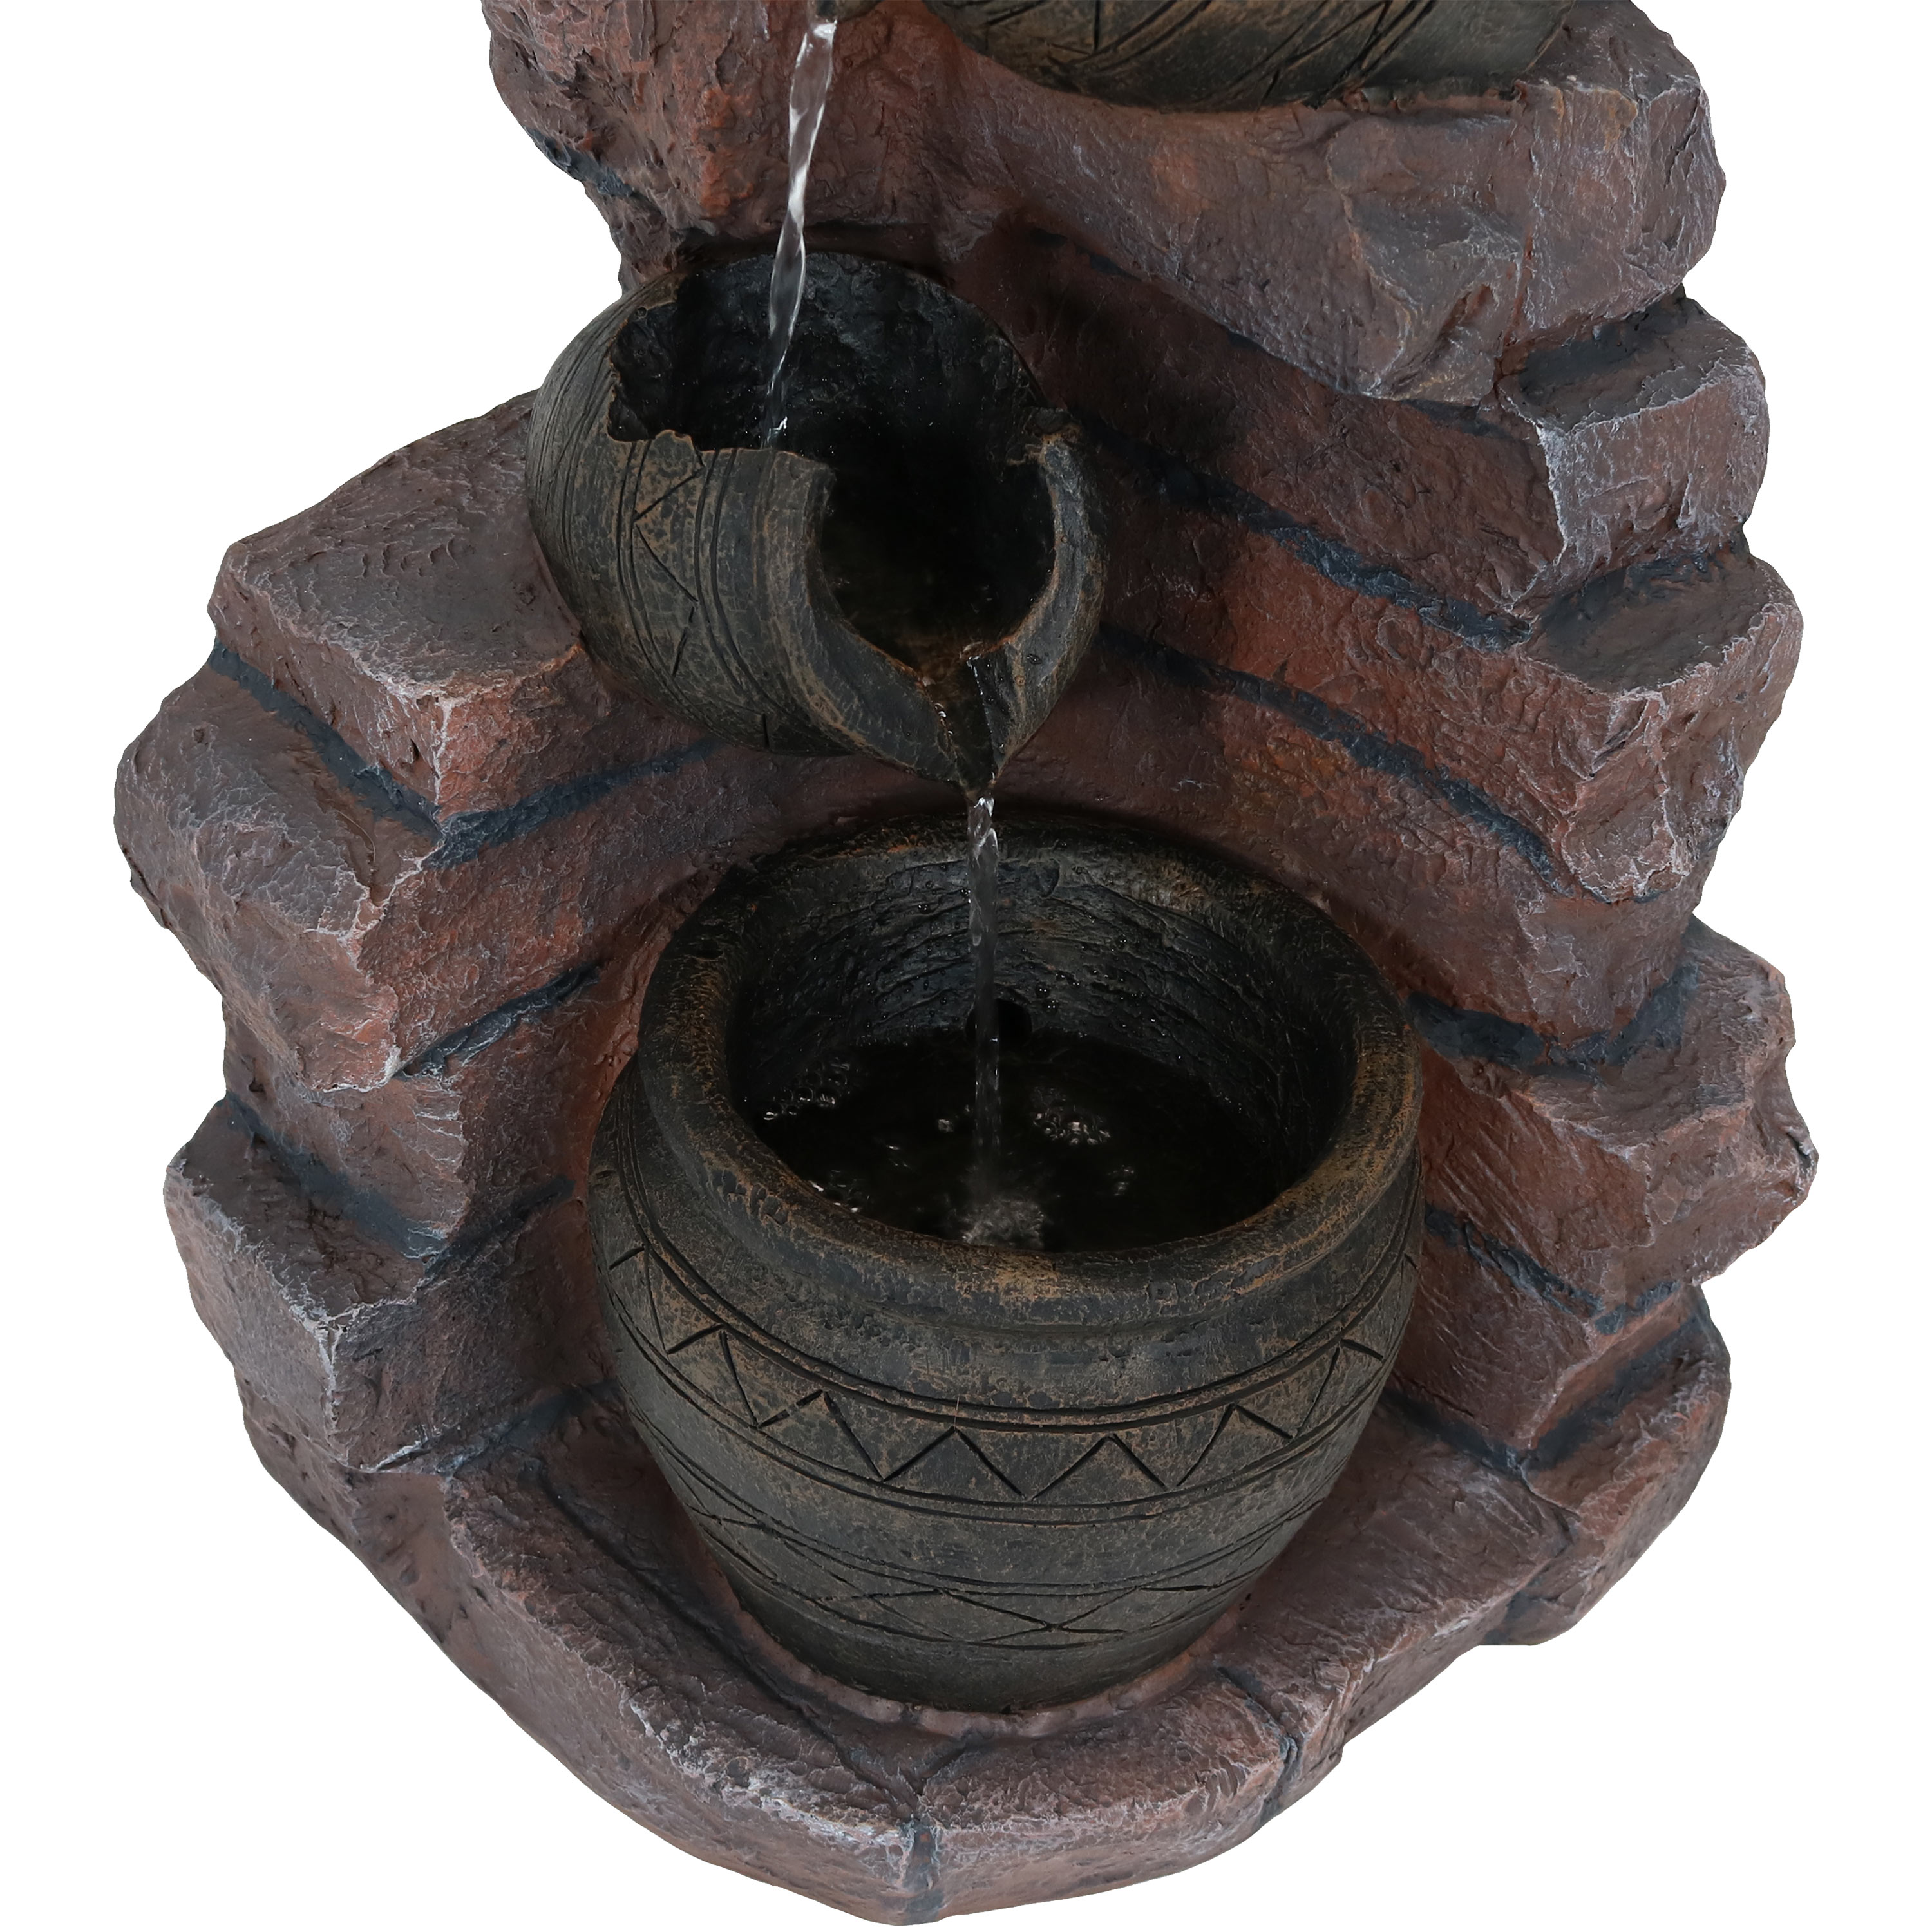 Sunnydaze Decor Crumbling Bricks and Pots Solar Water Fountain with Battery Backup - 27-Inch